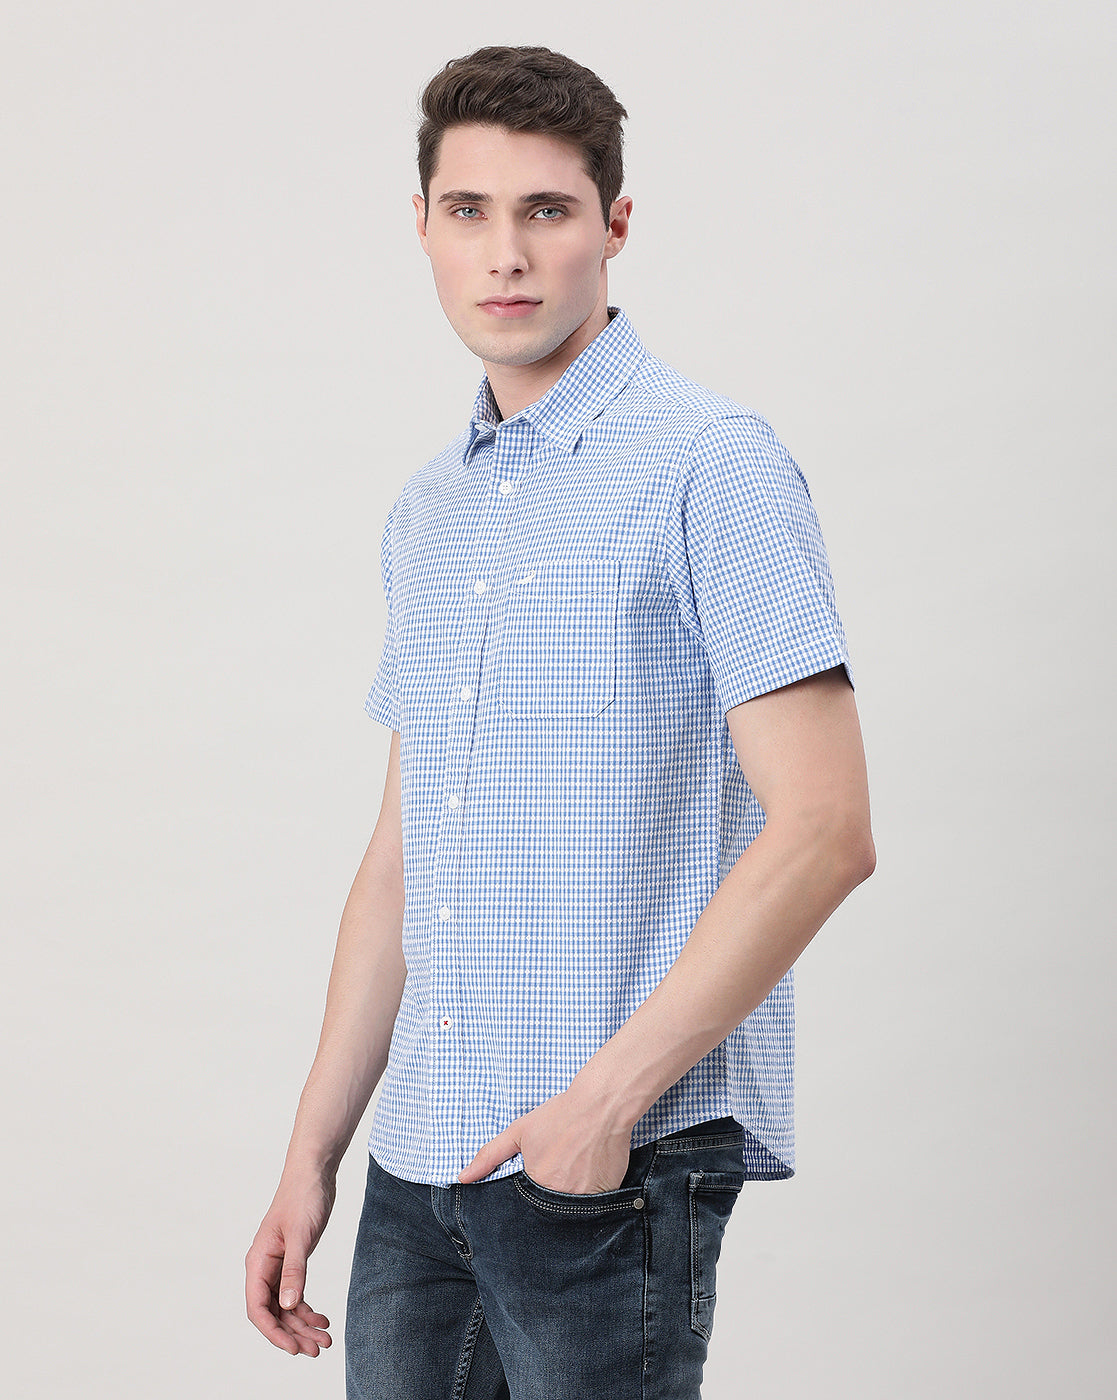 Casual Light Blue Half Sleeve Comfort Fit Checks Shirt With Collar For Men